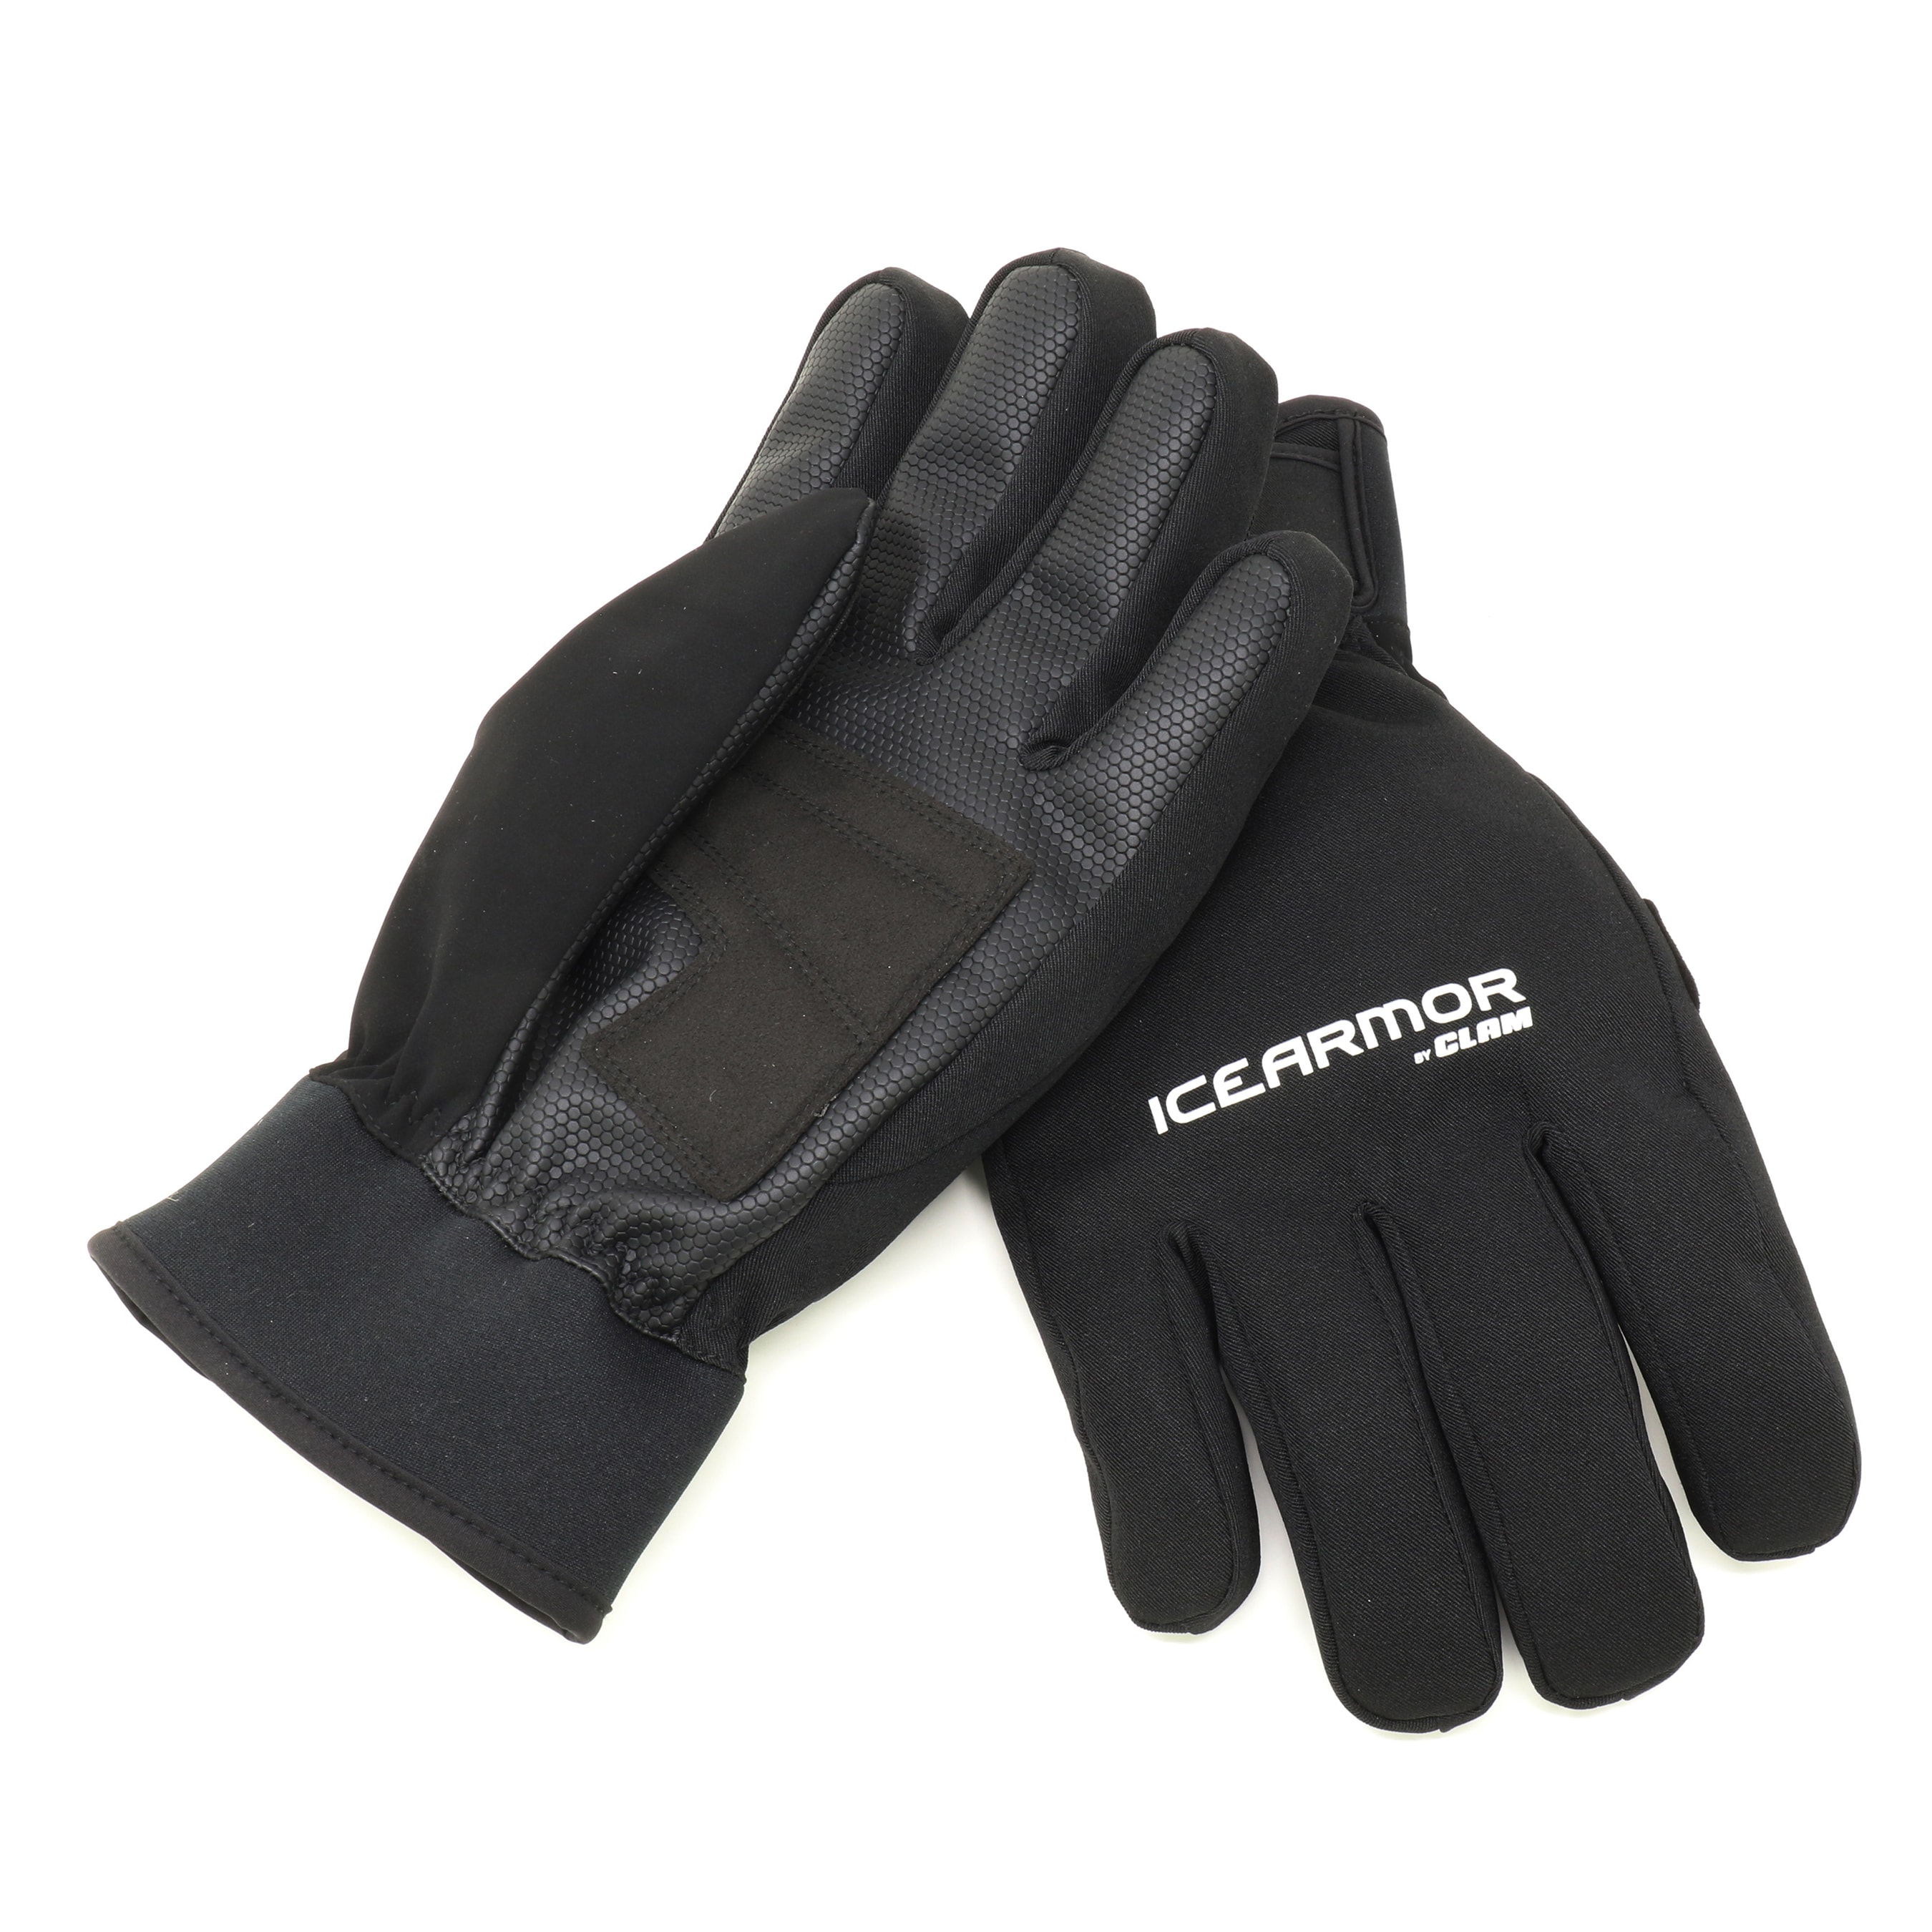 Clam Outdoors DLTA Men's Ice Fishing Gloves - Black, Adult Small